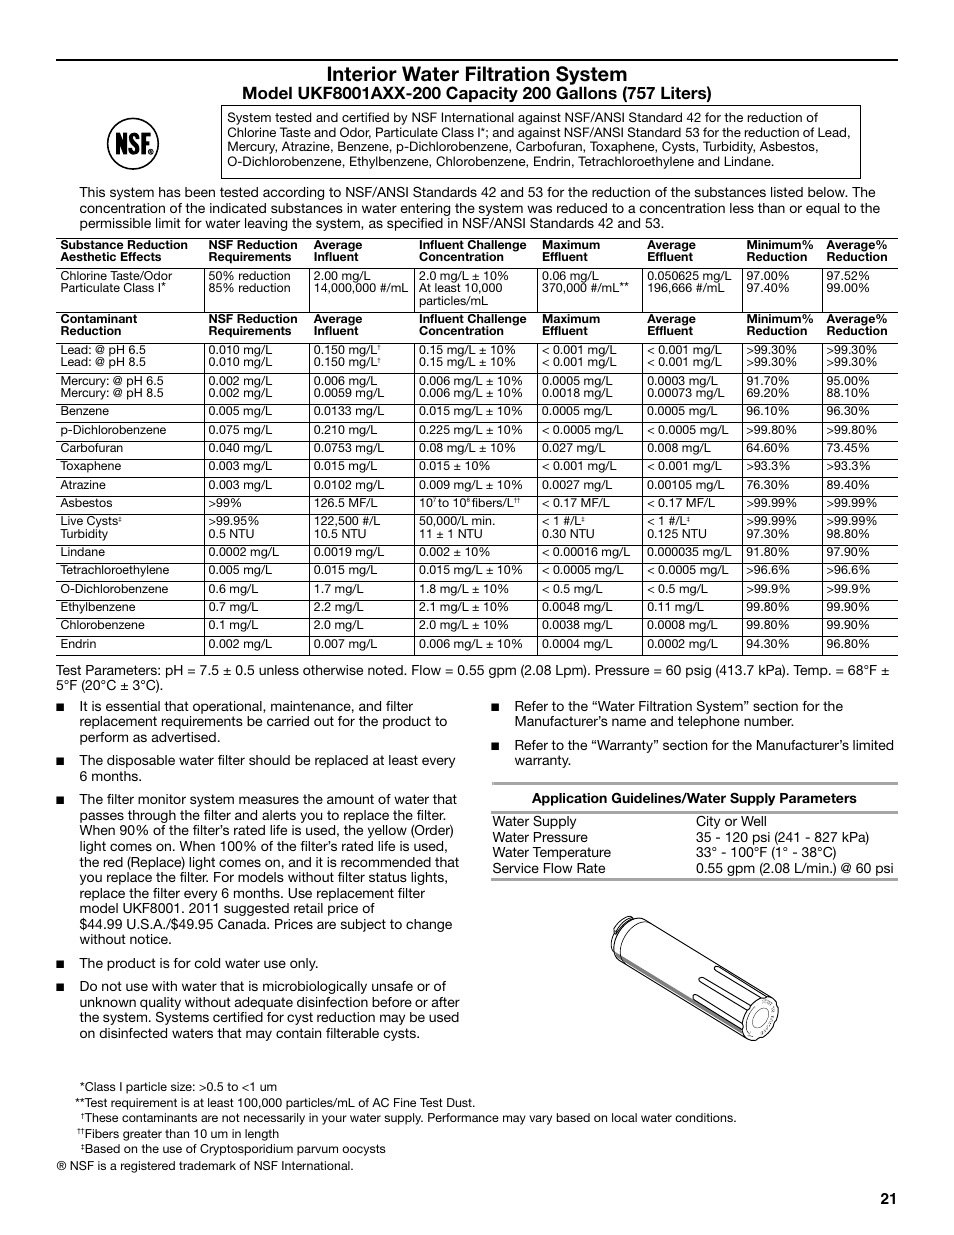 Interior water filtration system | Maytag MFX2570AEM User Manual | Page 21 / 70